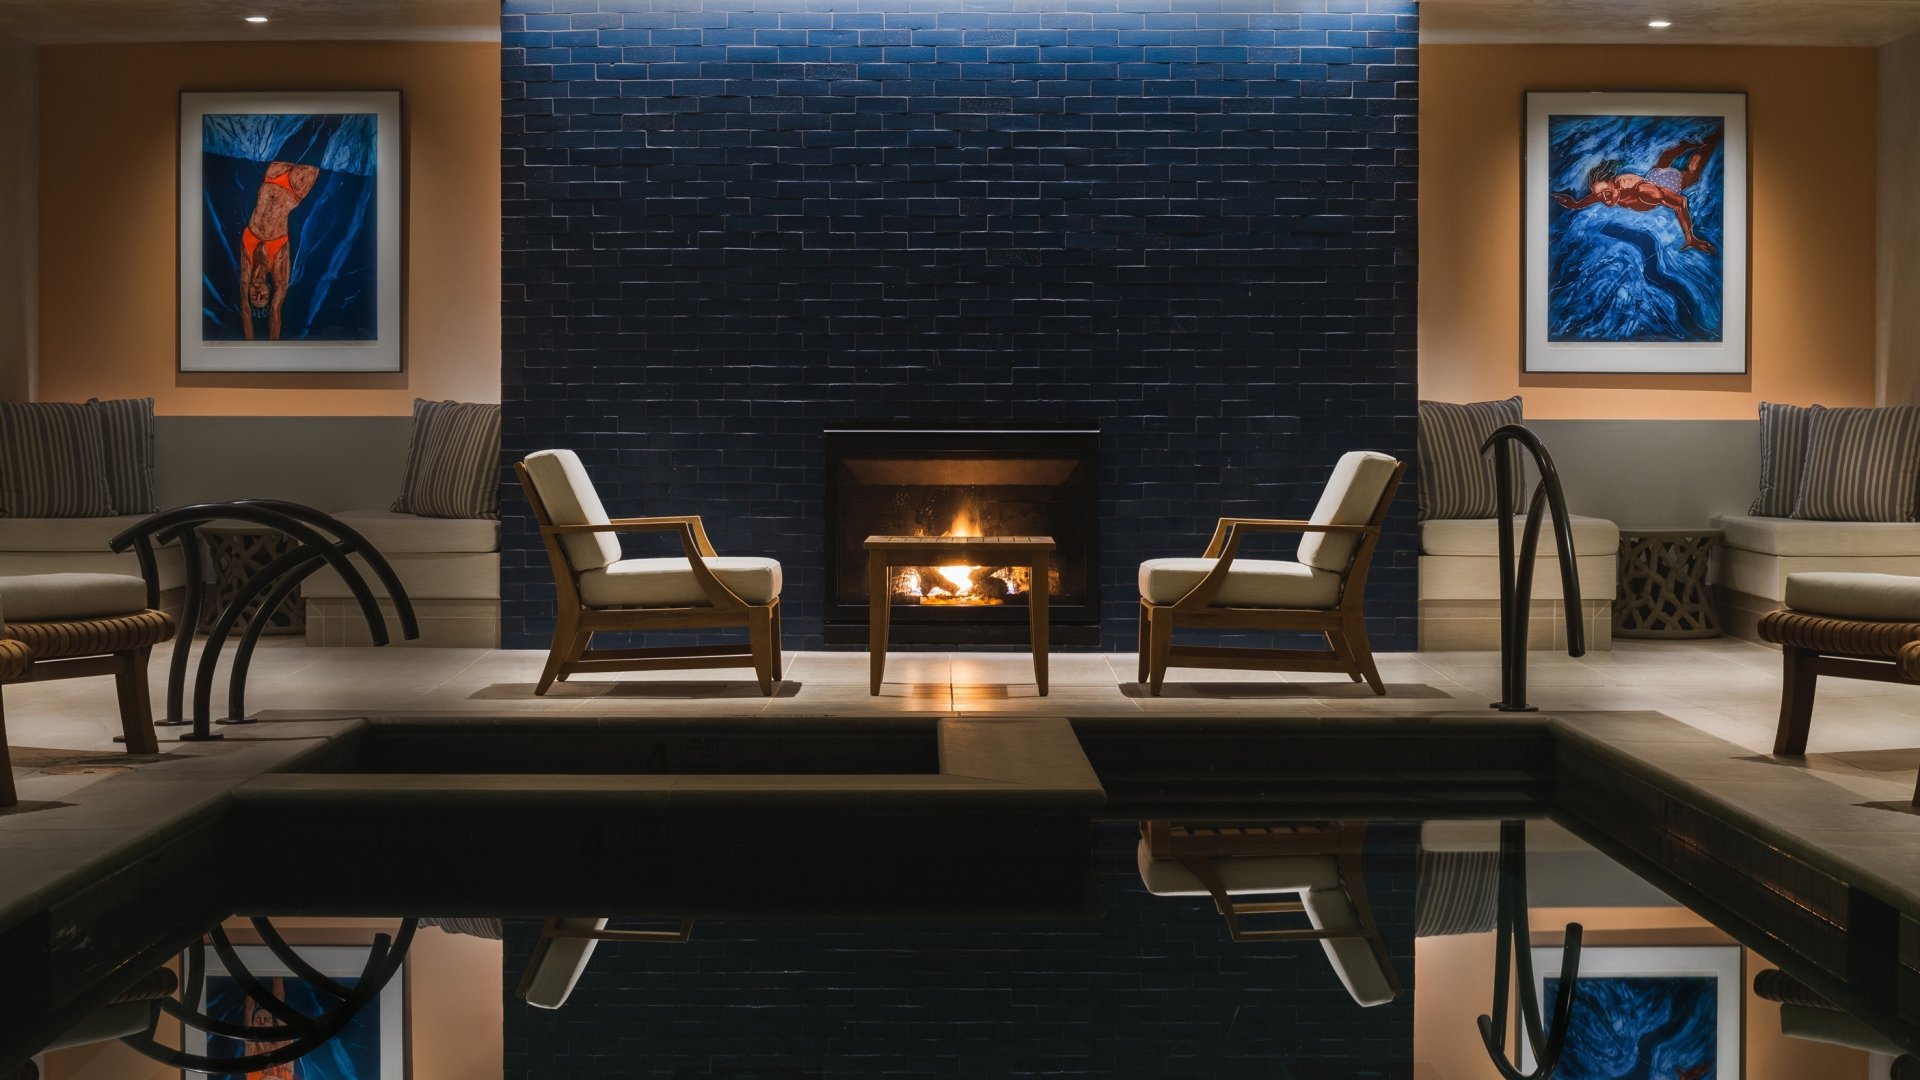 Pair of chairs in front of fireplace and pool in The Spa.